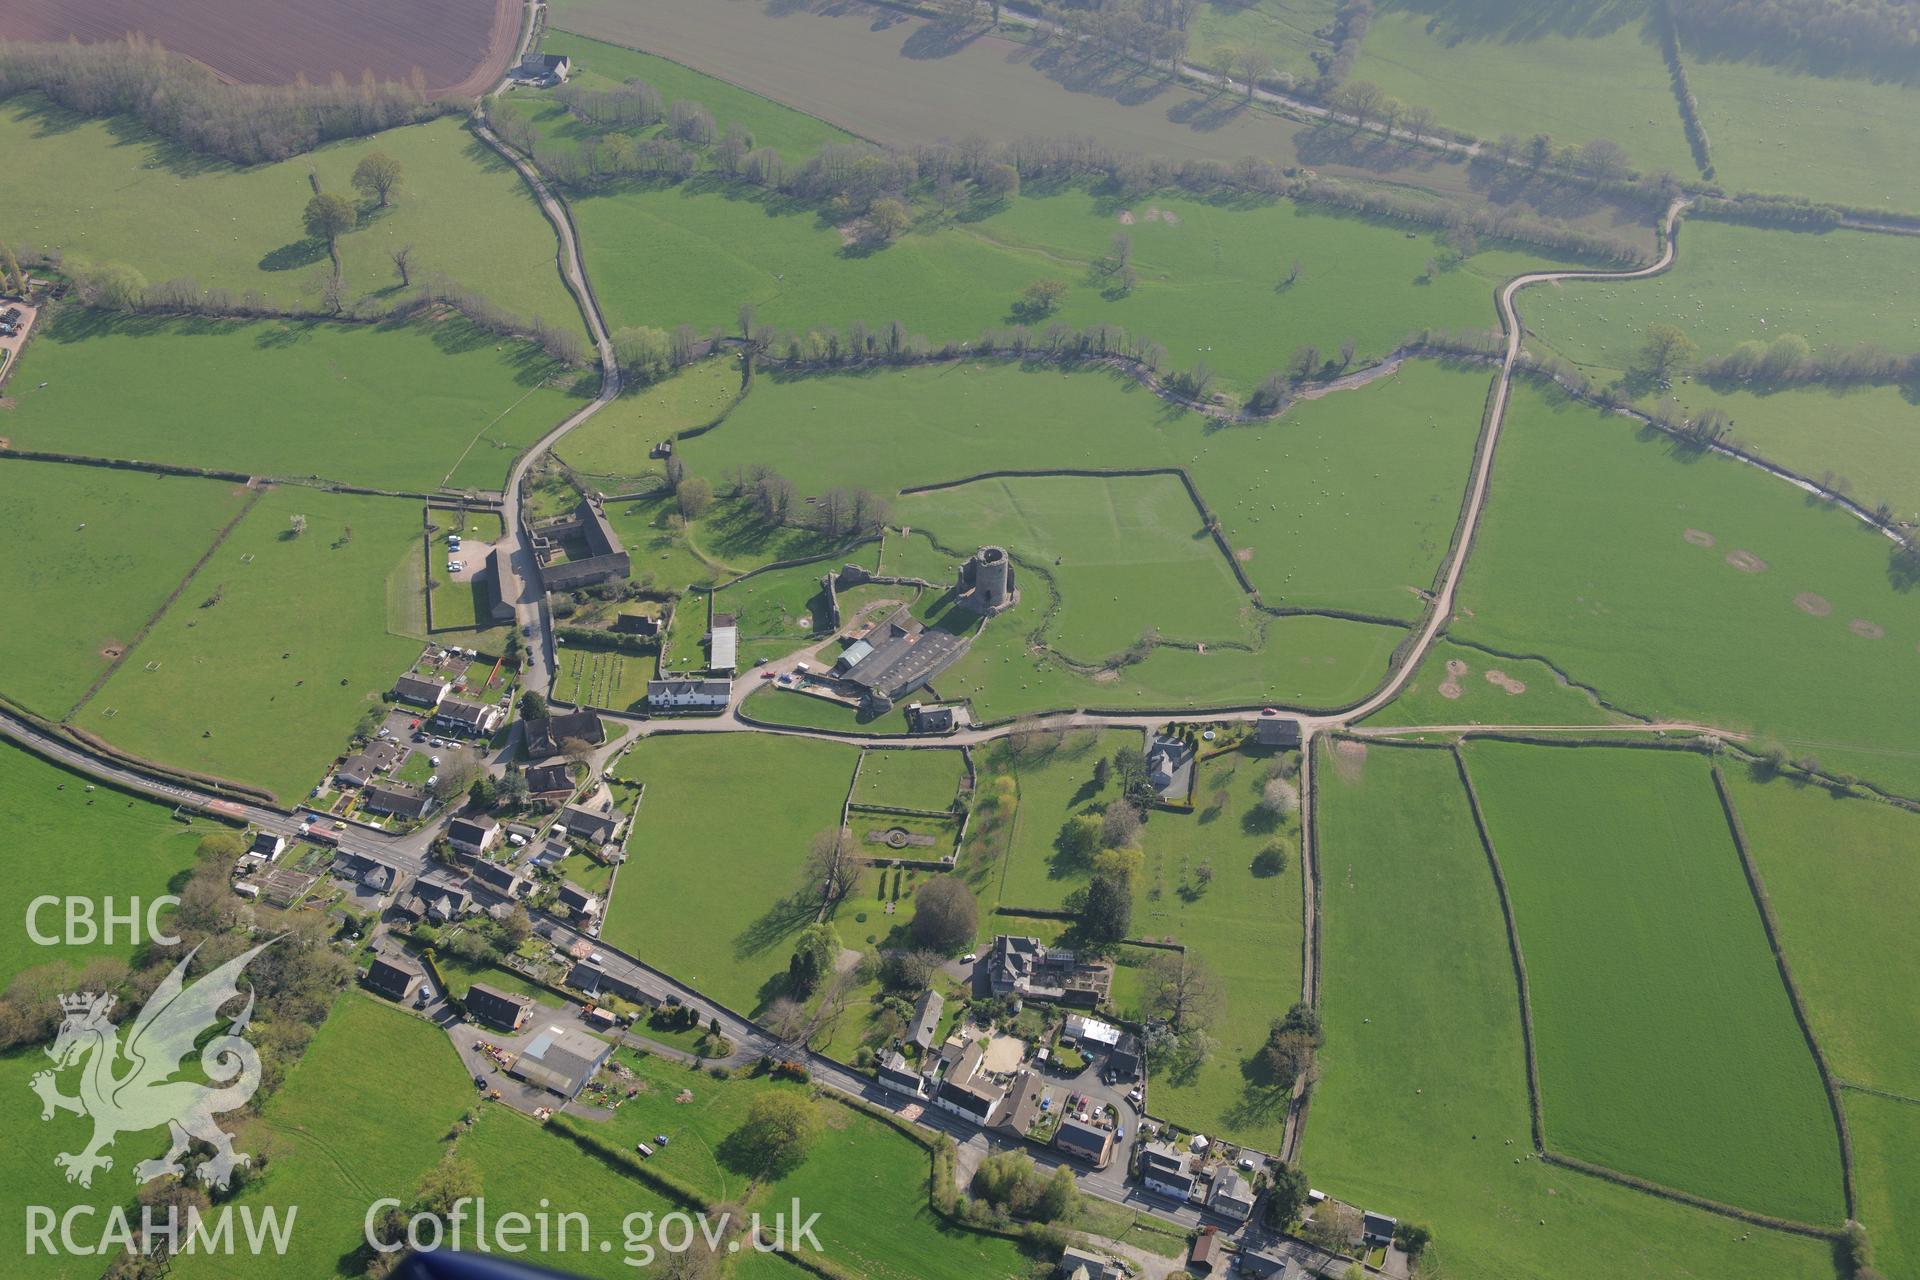 Tretower Village, Castle, Court, Cottage, Barn and Leat, Ty Llys Farm and St John's Church. Oblique aerial photograph taken during the Royal Commission's programme of archaeological aerial reconnaissance by Toby Driver on 21st April 2015